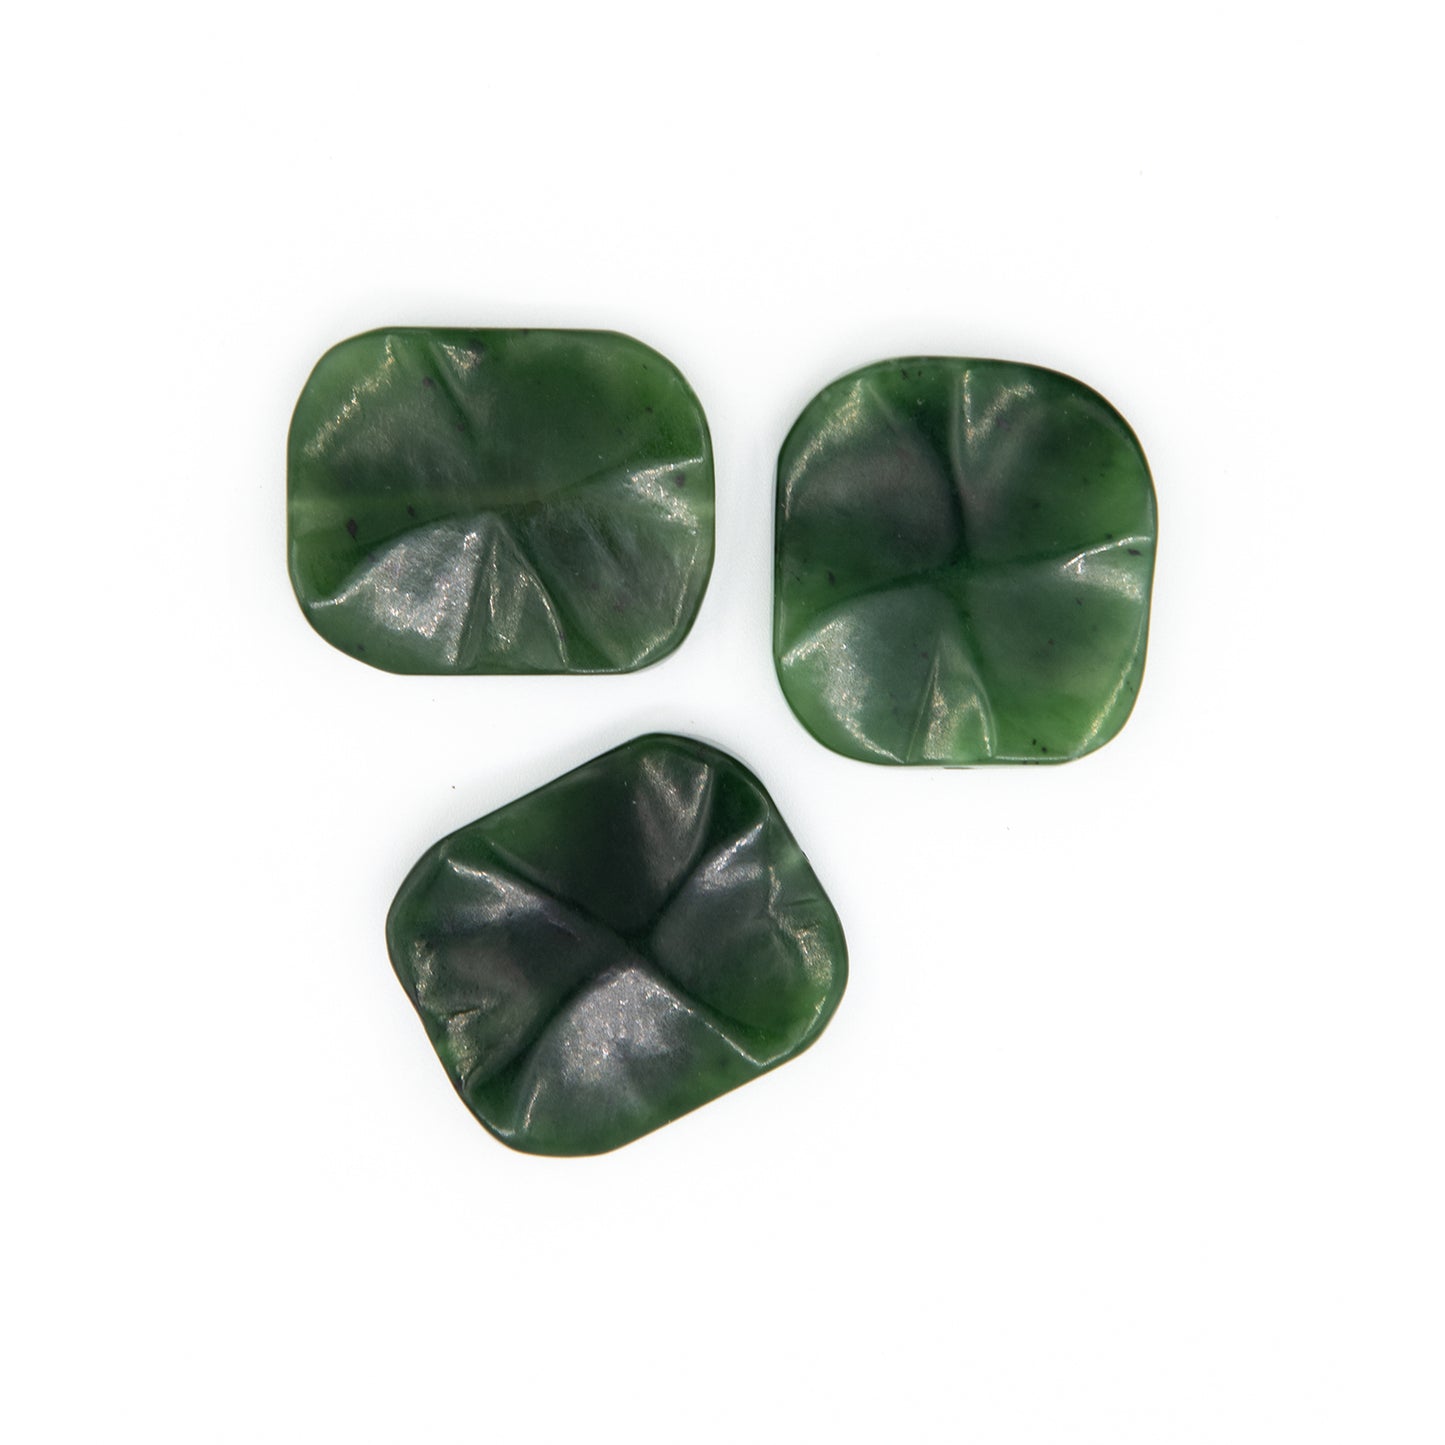 Unique Canada Jade Beads.  A unique design in green translucent Jade sourced in British Columbia.  These beads have a beautiful undulating shape with a pattern carved into the face on both sides.  Jade is said to bring prosperity and good health.  Size: over 1 inch on each side.